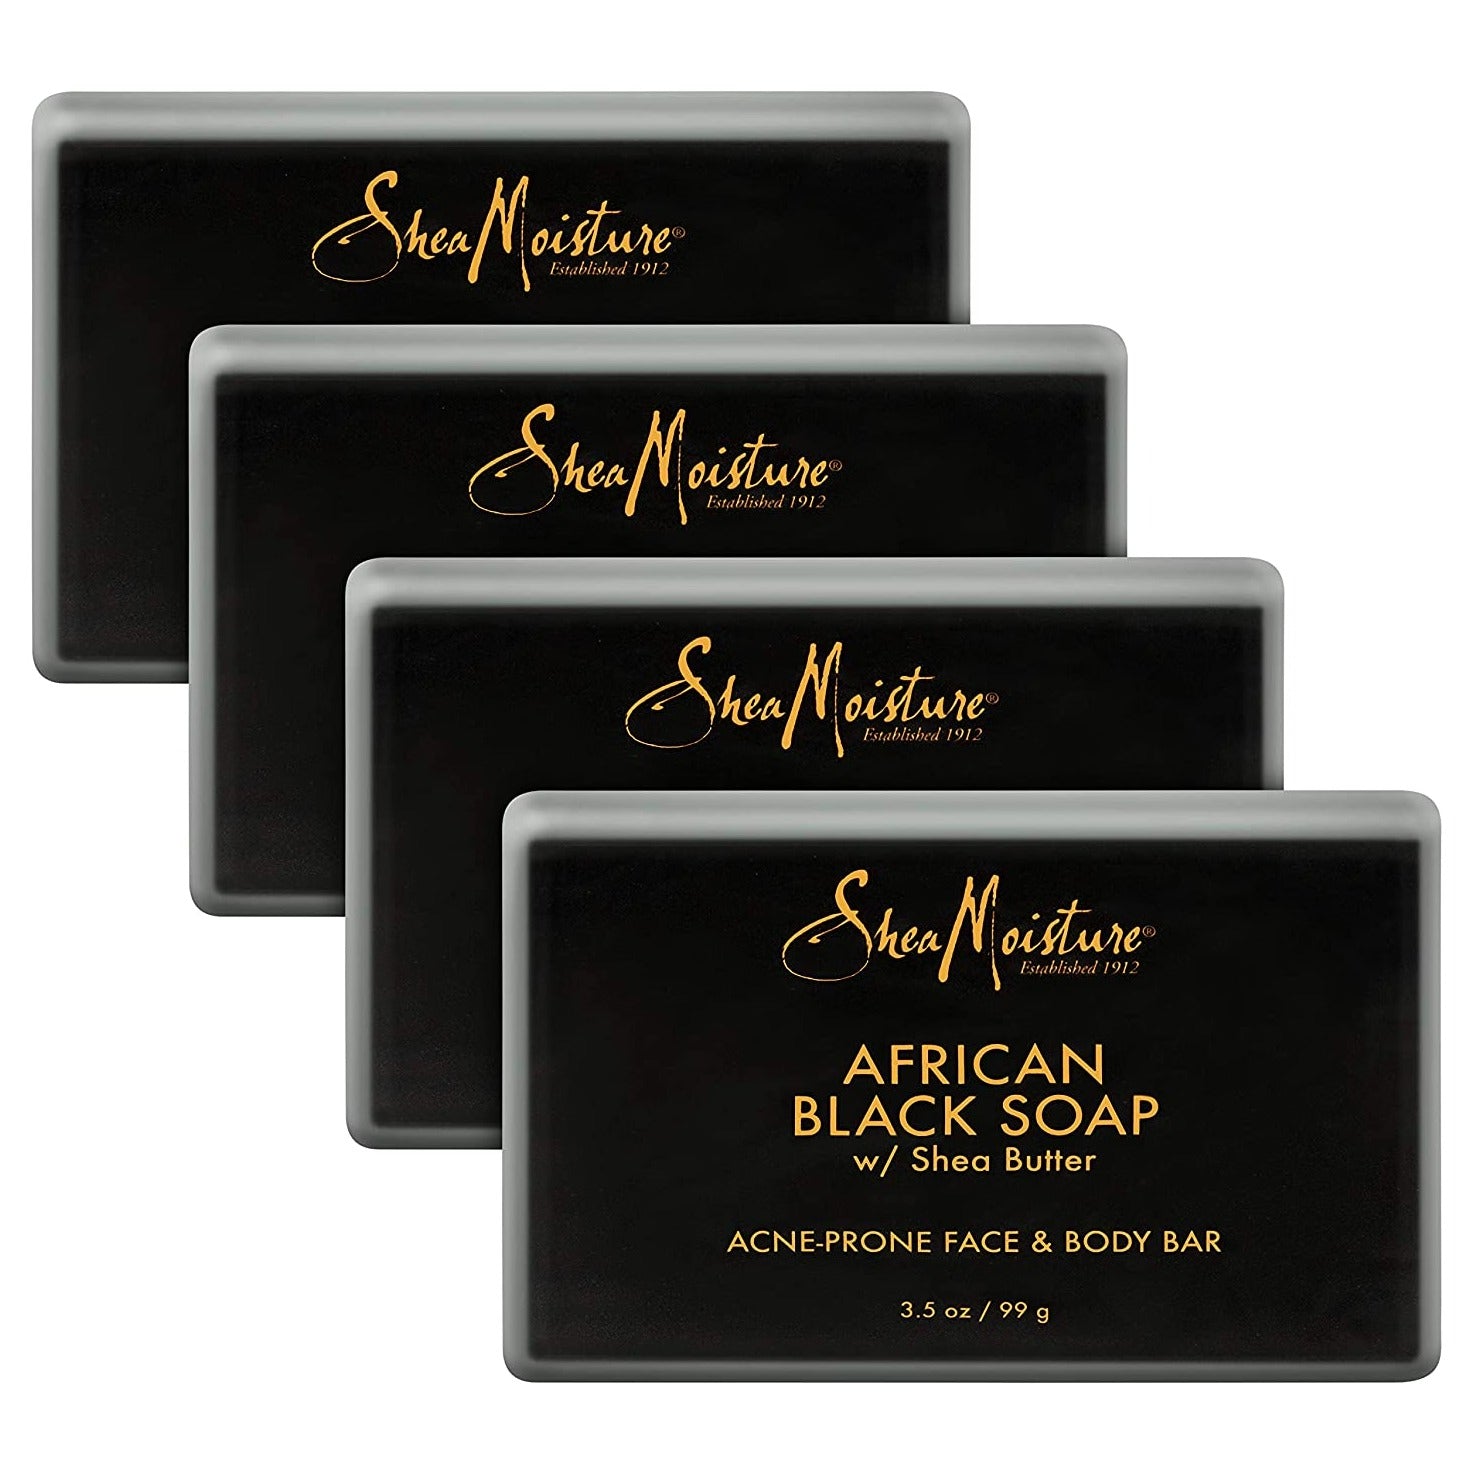 Shea Moisture African Black Soap For Oily Blemish Prone Skin. Excellent For The Most Sensitive Skin Types